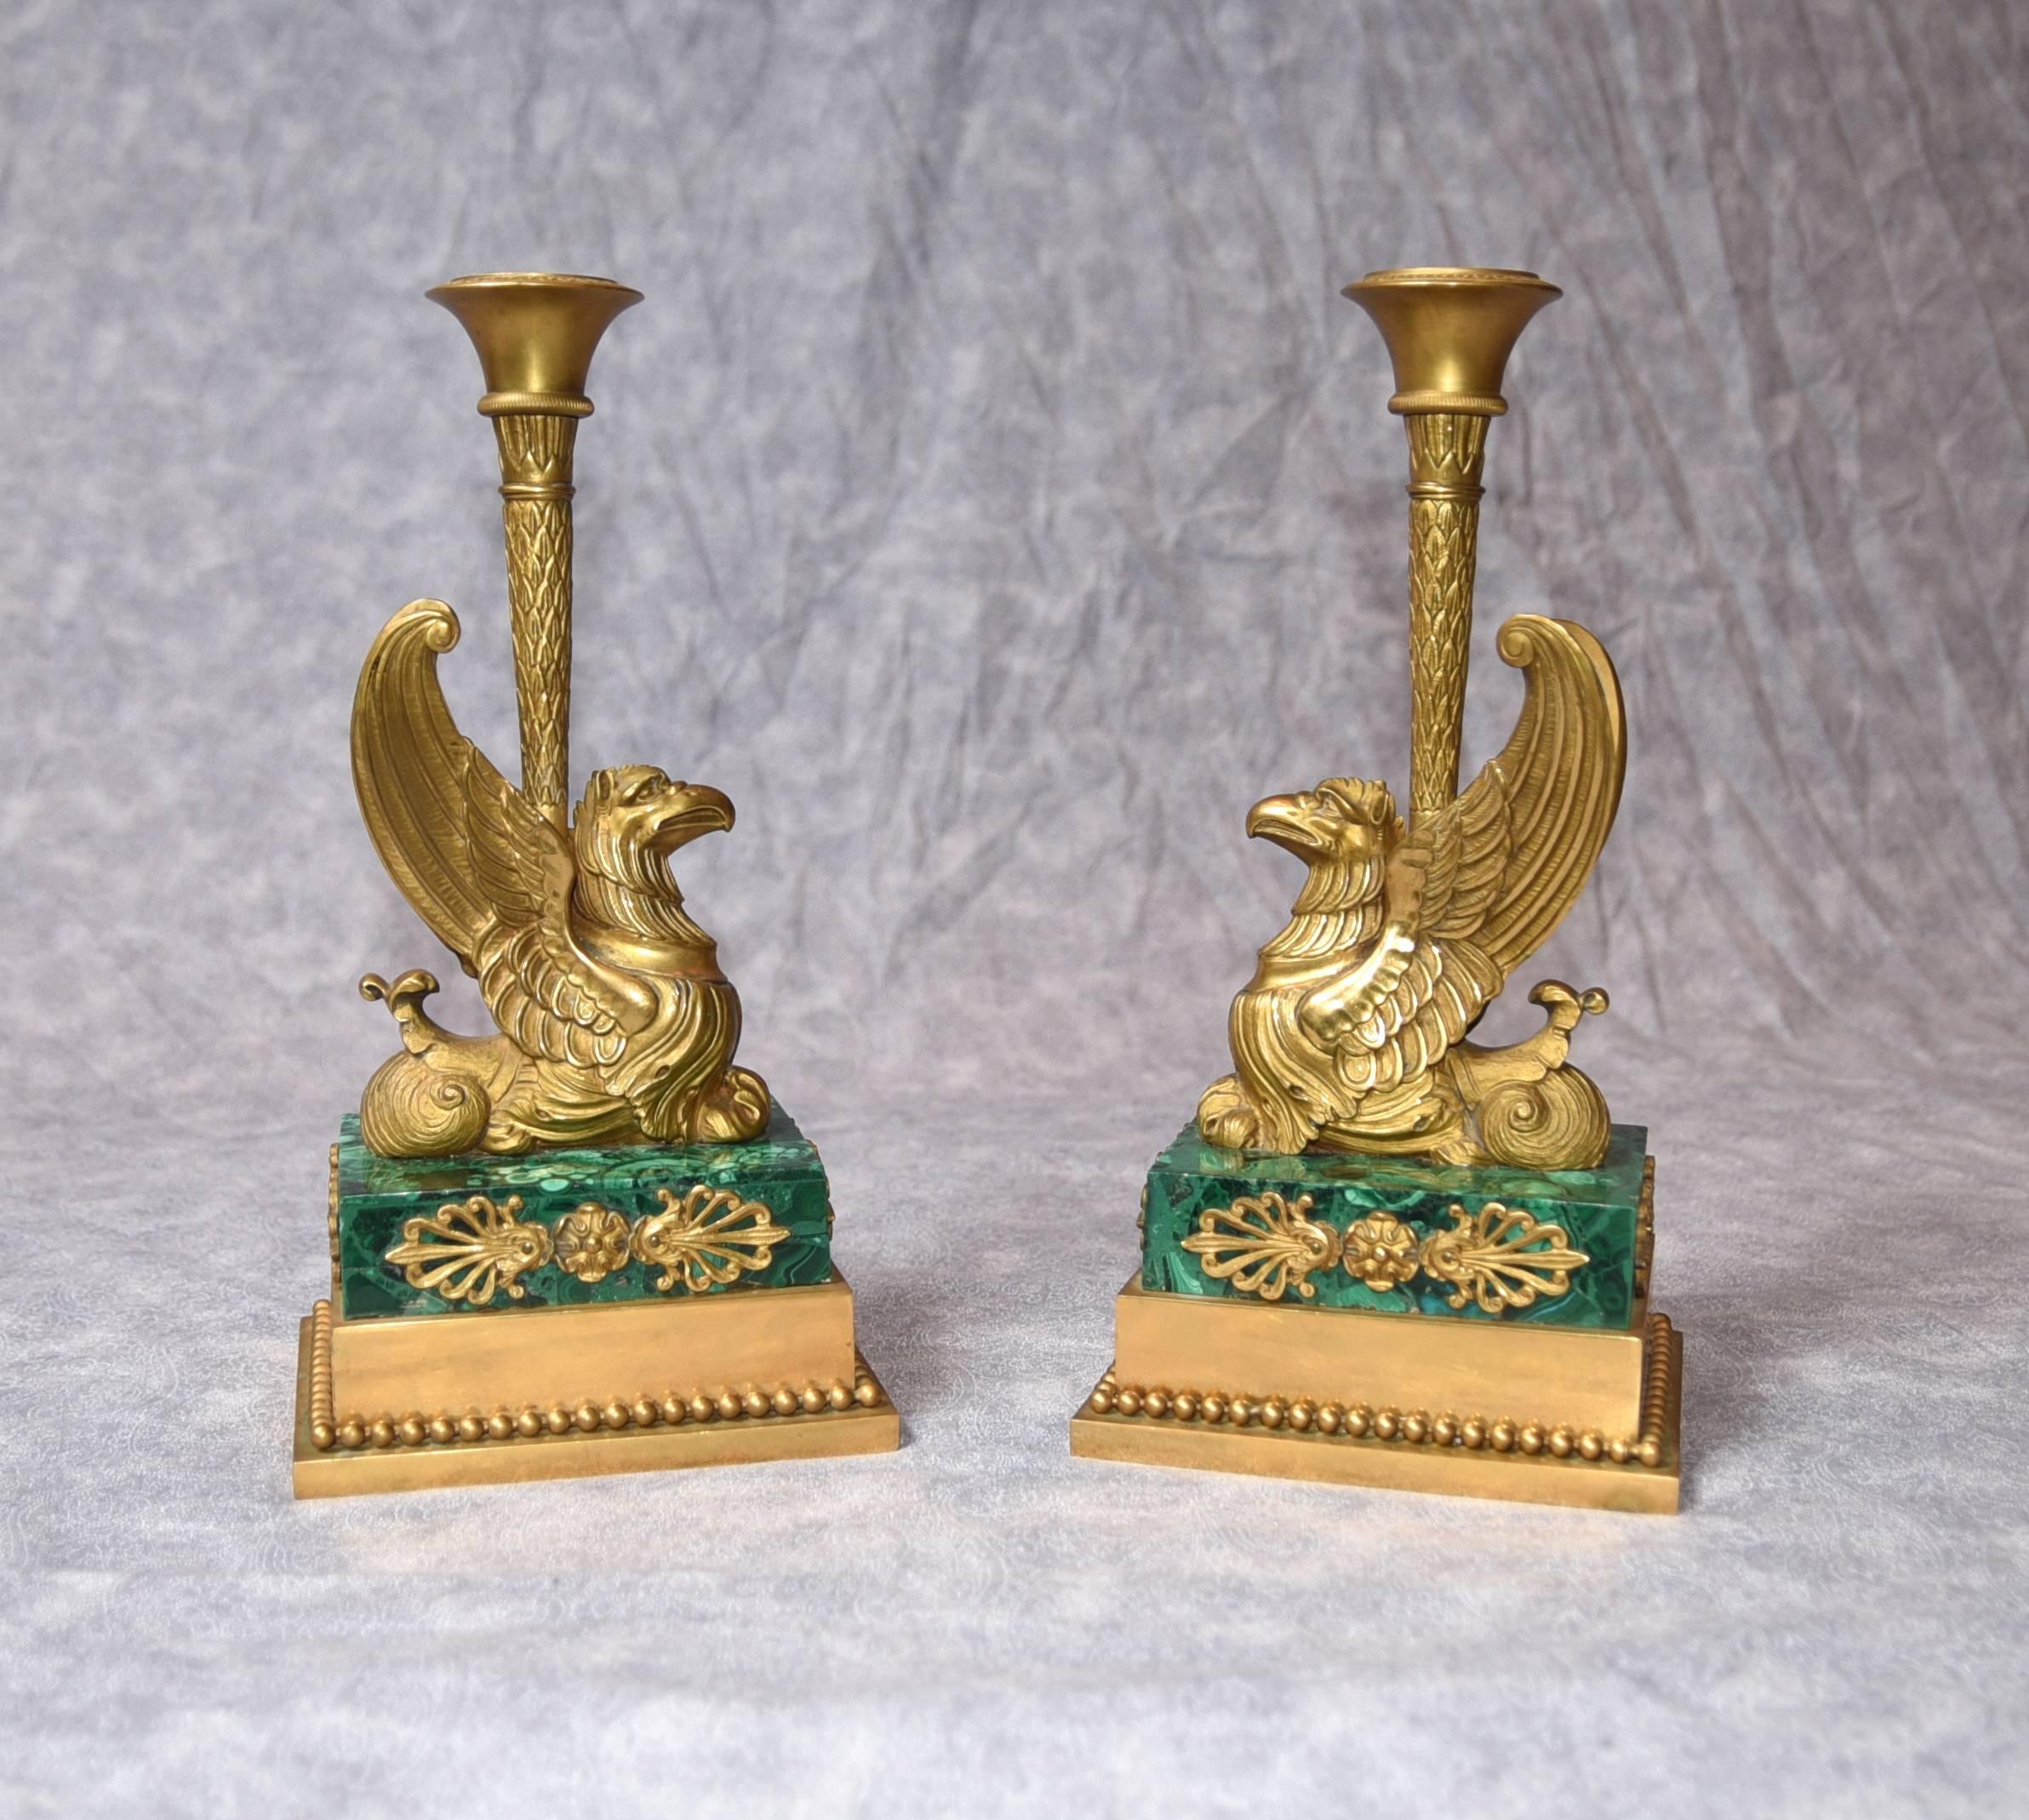 Outstanding pair of antique French Empire bronze griffin candlesticks
Of exceptional quality this pair are adorned with malachite to the base
Hopefully the photos illustrate the quality to the casting, very intricate
Griffins look great with